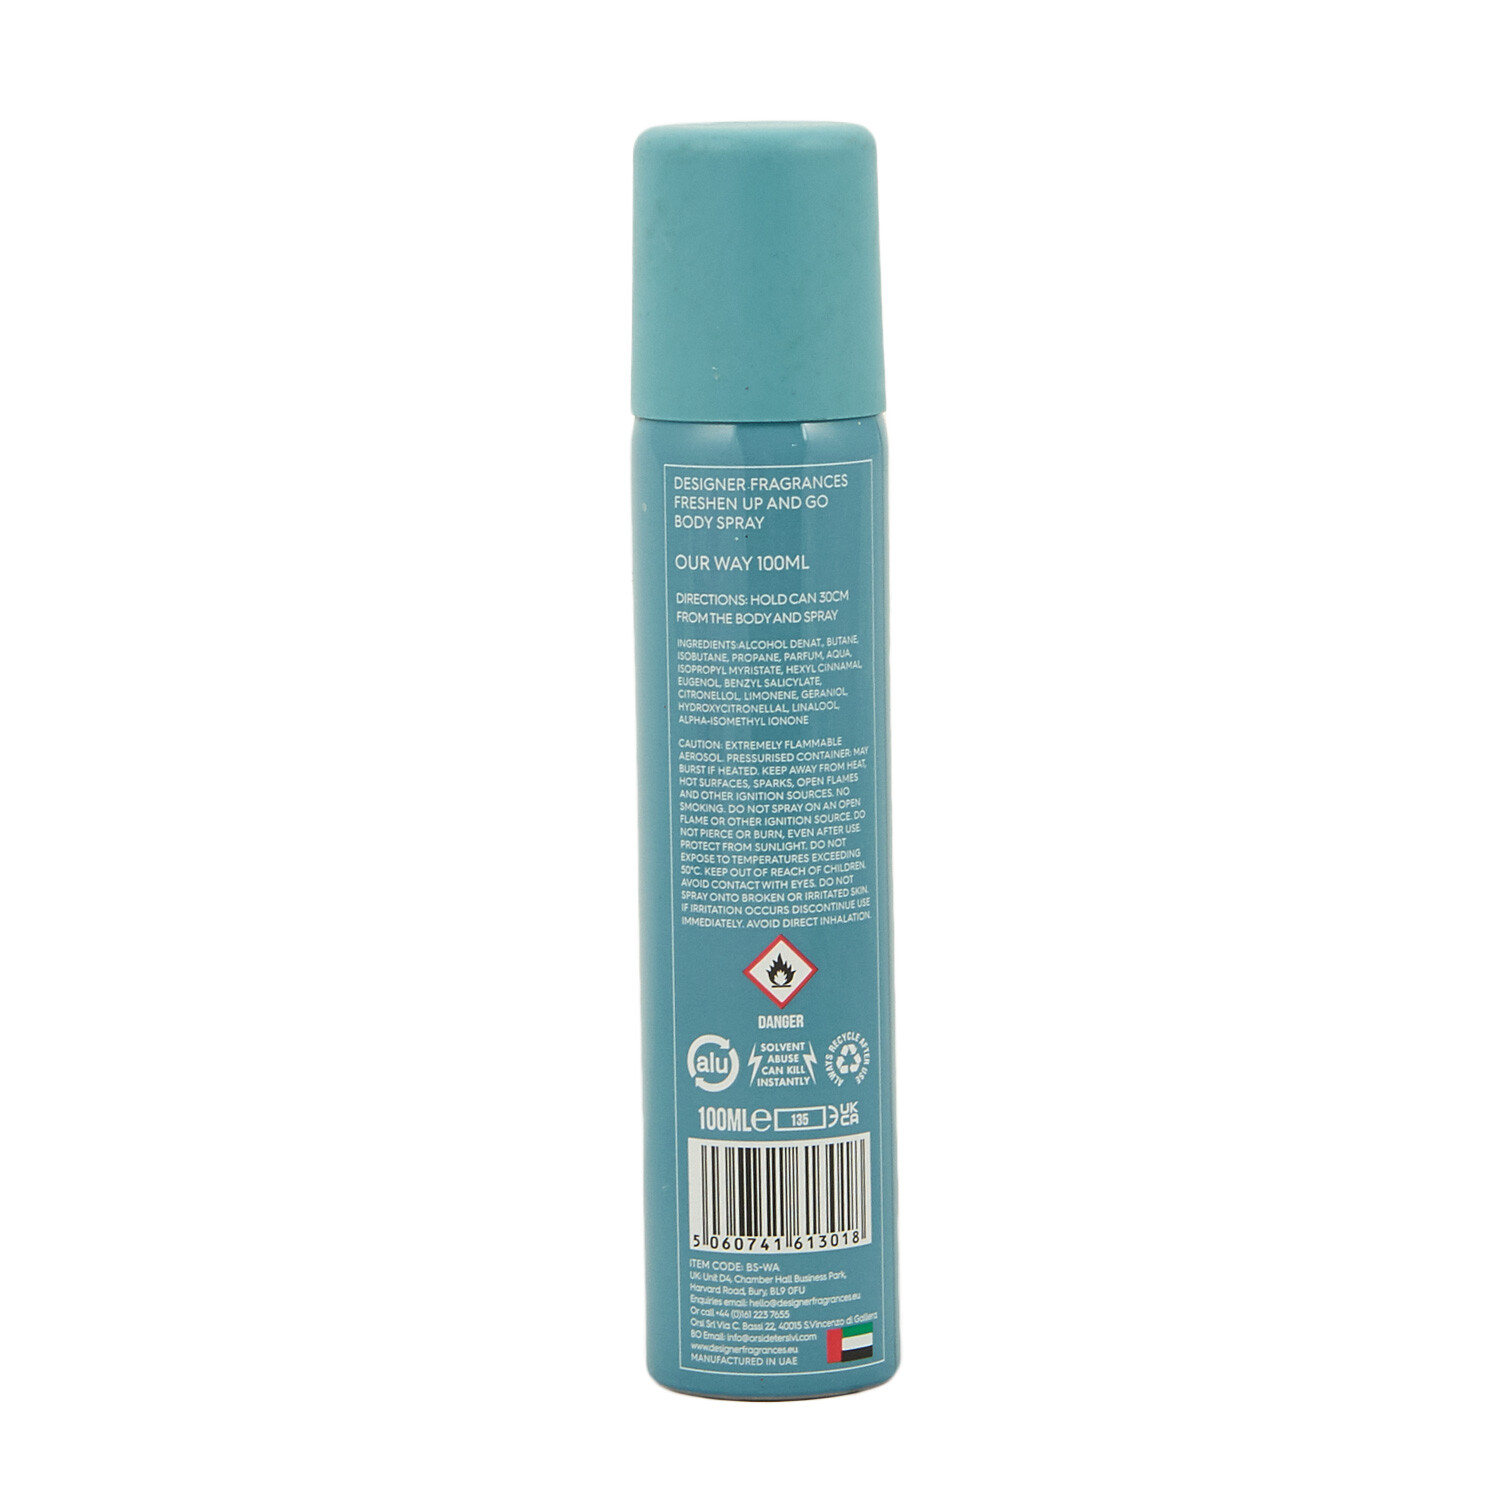 Our Way Body Spray - Teal Image 2